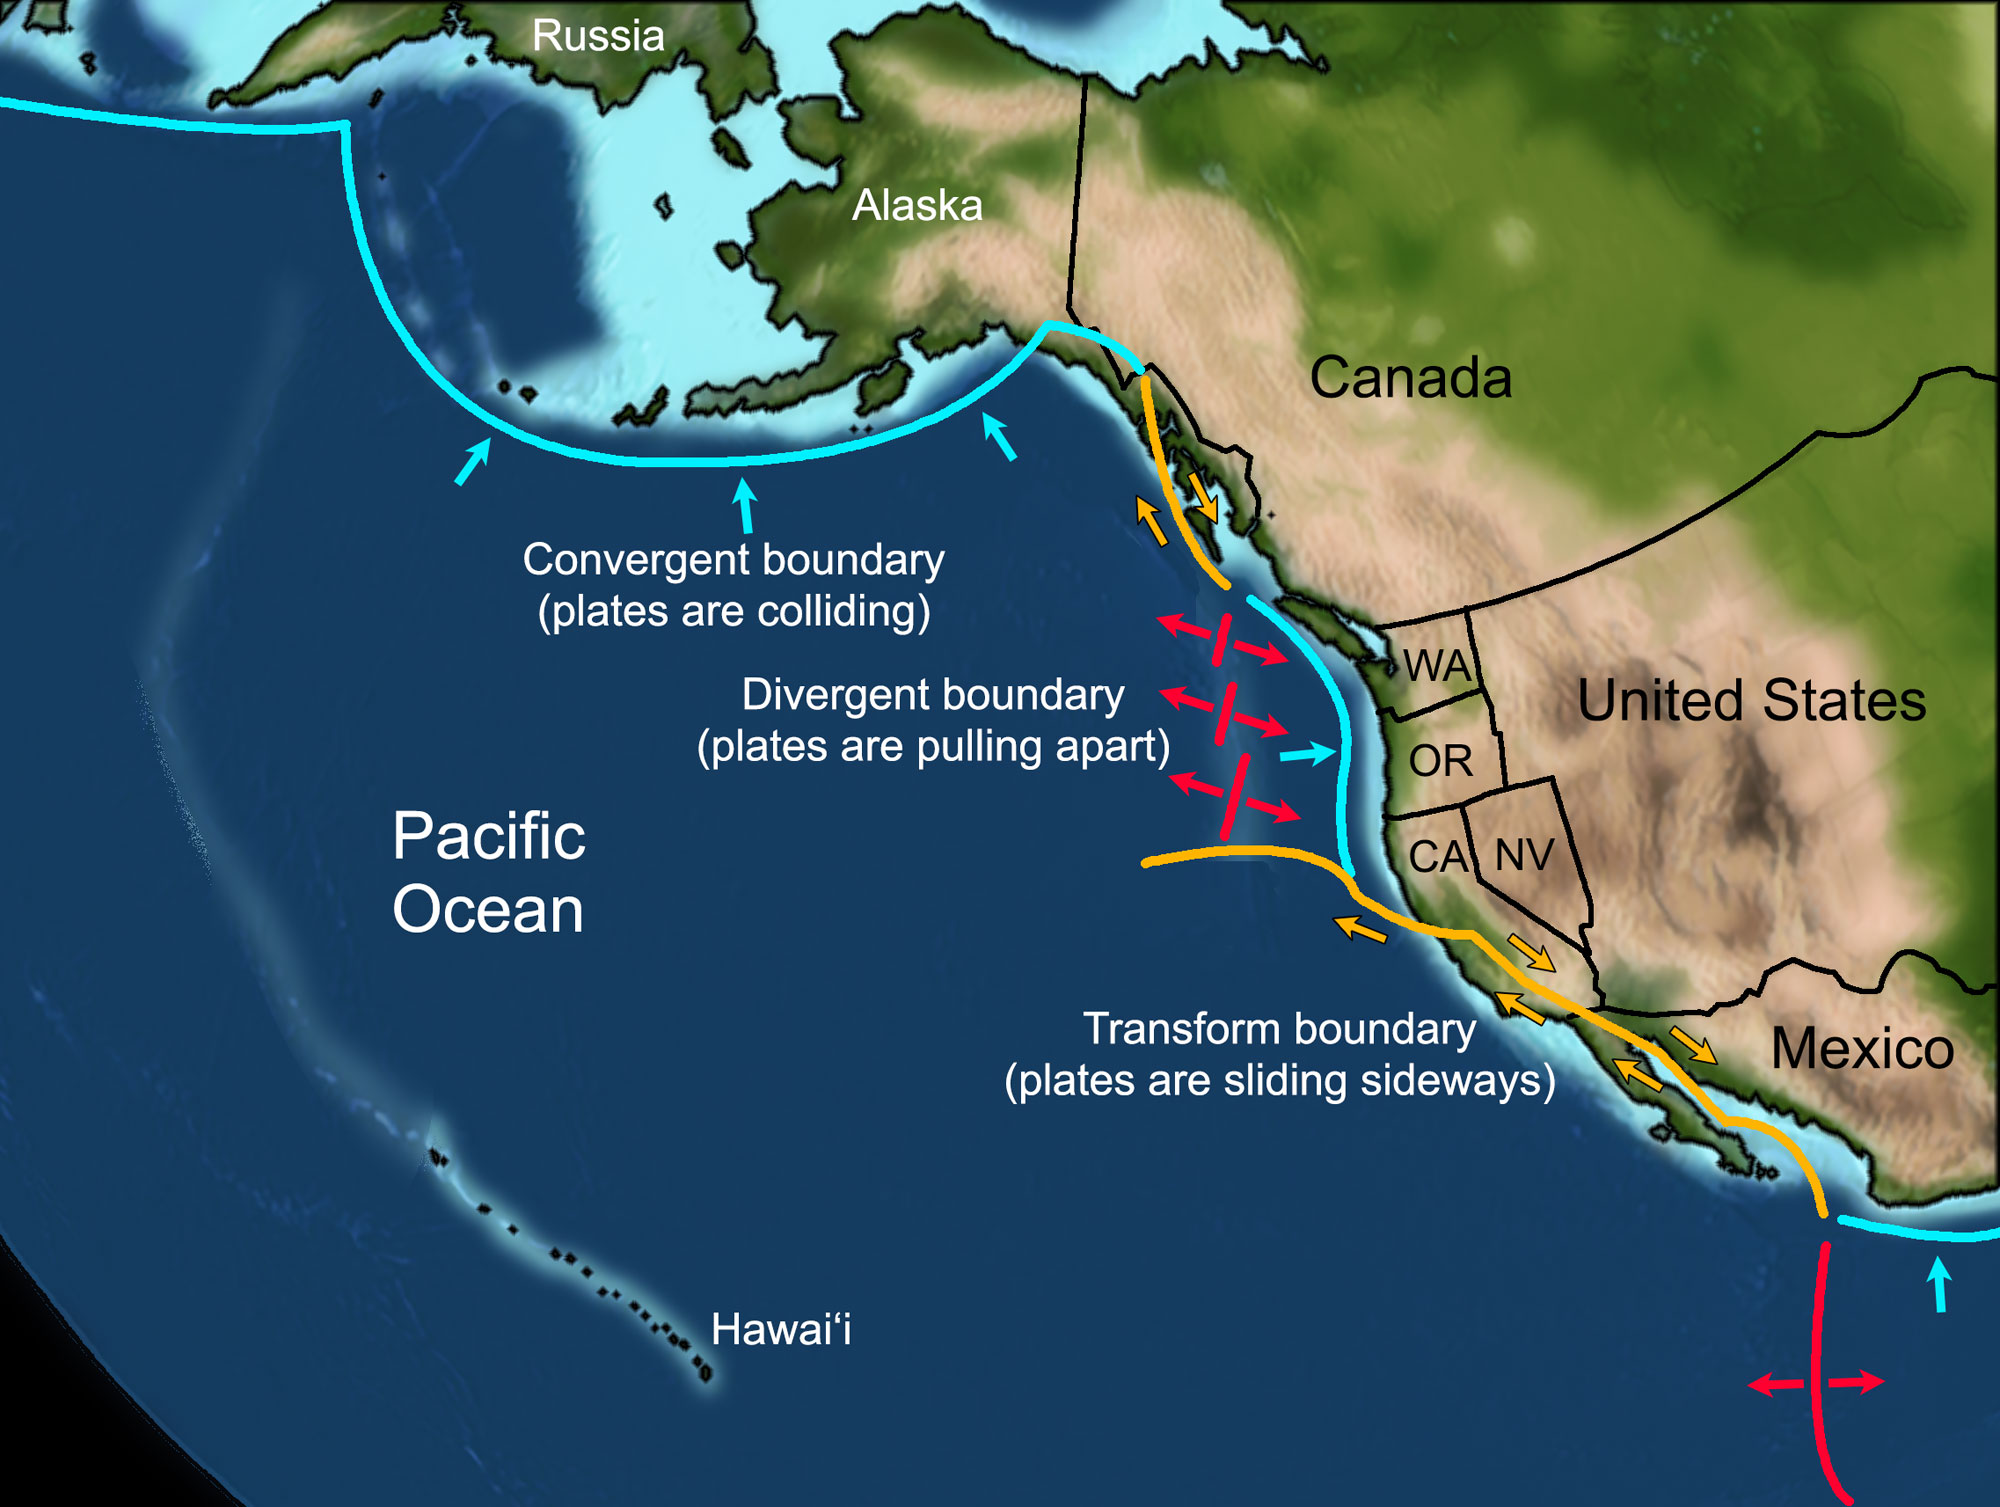 Map of the West Coast of North America today. The map shows subduction zones paralleling the southern coast of Alaska, off the coast of Washington, Oregon, and northern California, and off the central coast of Mexico. Transform boundaries occur in western Canada and southern California to northern Mexico.